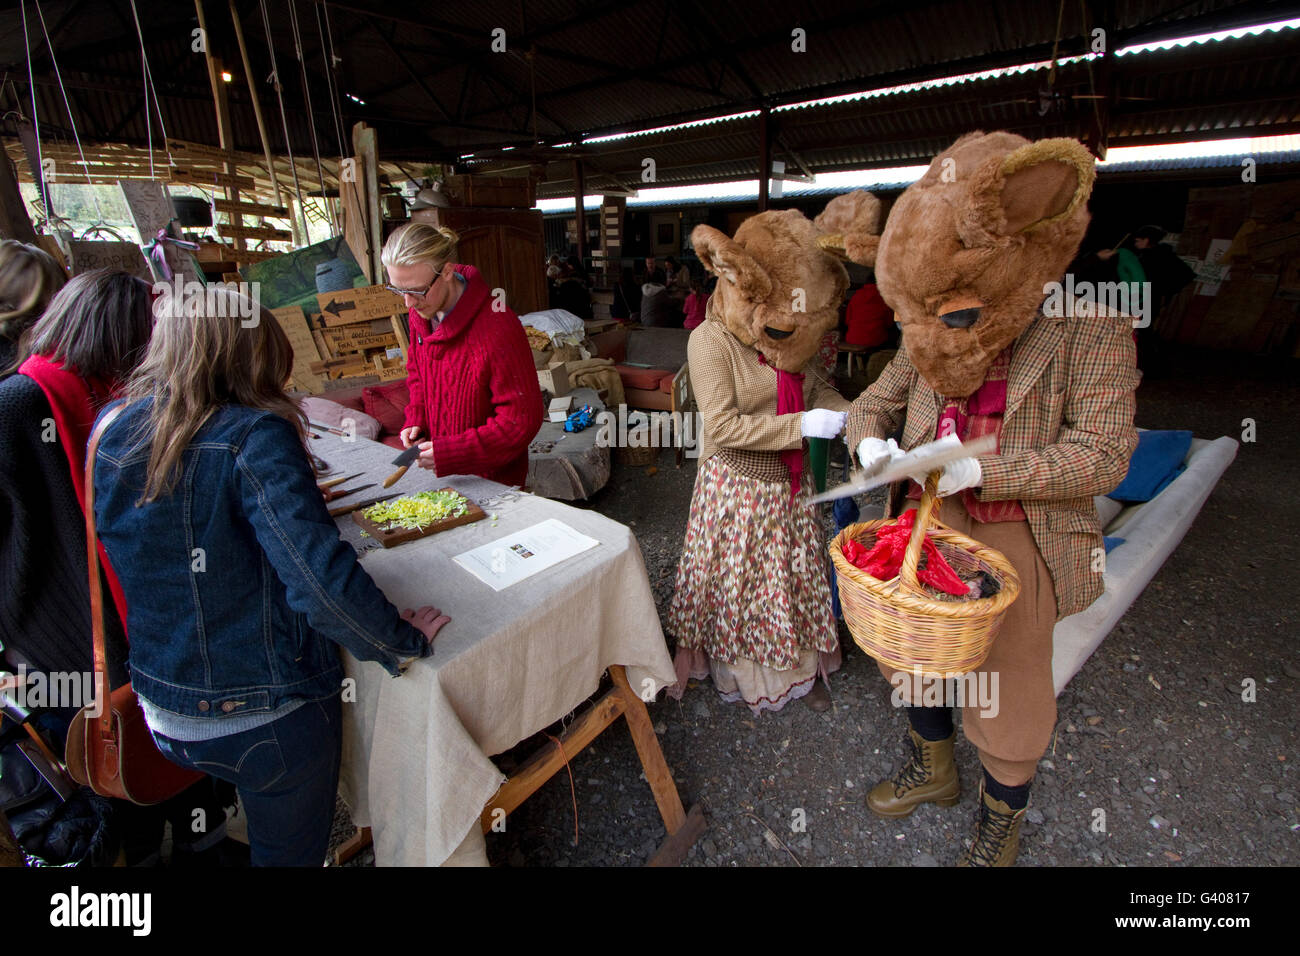 Two actors in period mouse costumes at the Alde Valley Spring Festival Stock Photo